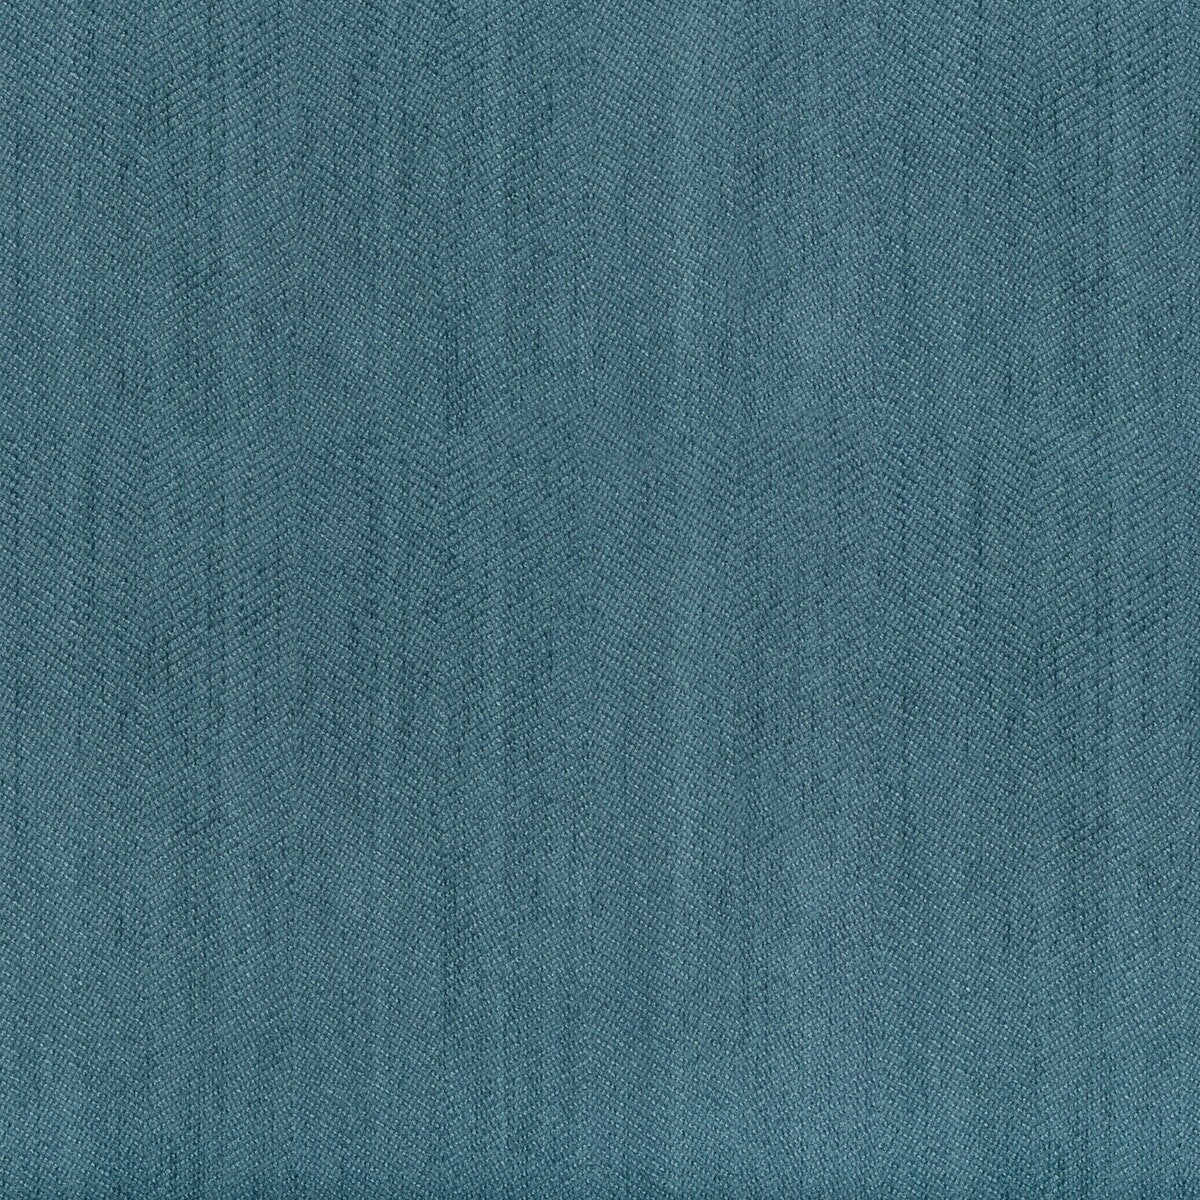 Kravet Contract fabric in 33877-505 color - pattern 33877.505.0 - by Kravet Contract in the Incase Crypton Gis collection